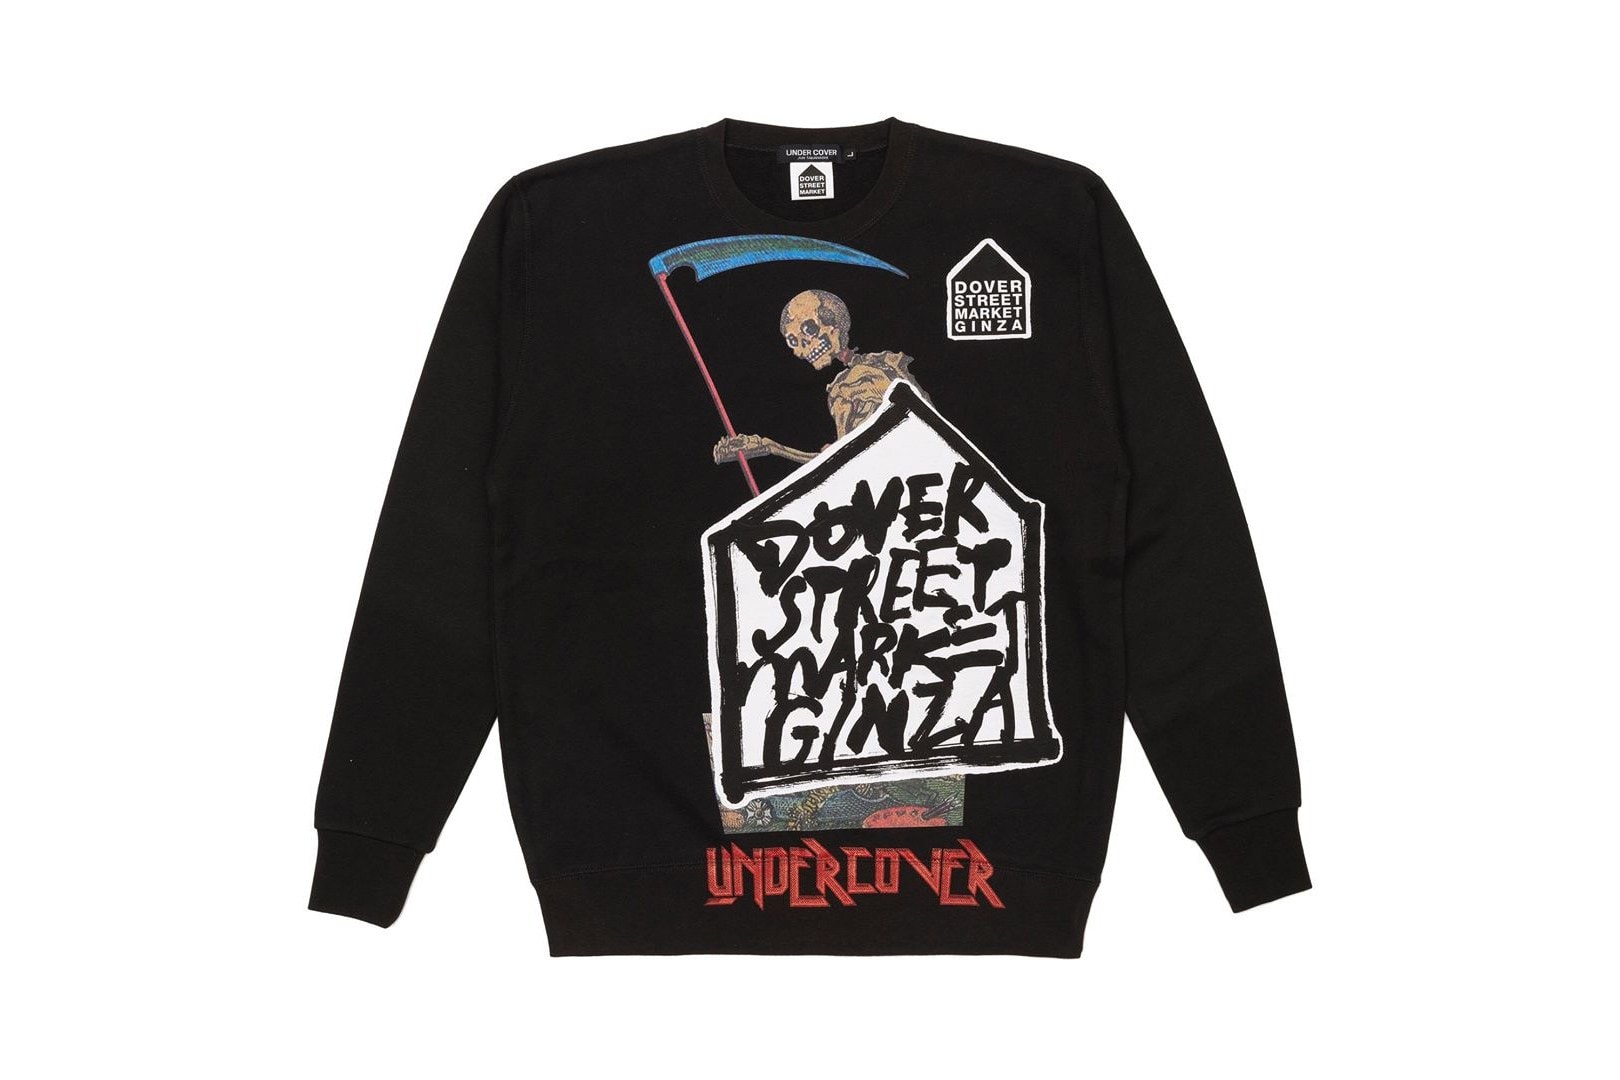 UNDERCOVER x Dover Street Market Ginza 5th Anniversary "Chaos and Balance" Capsule